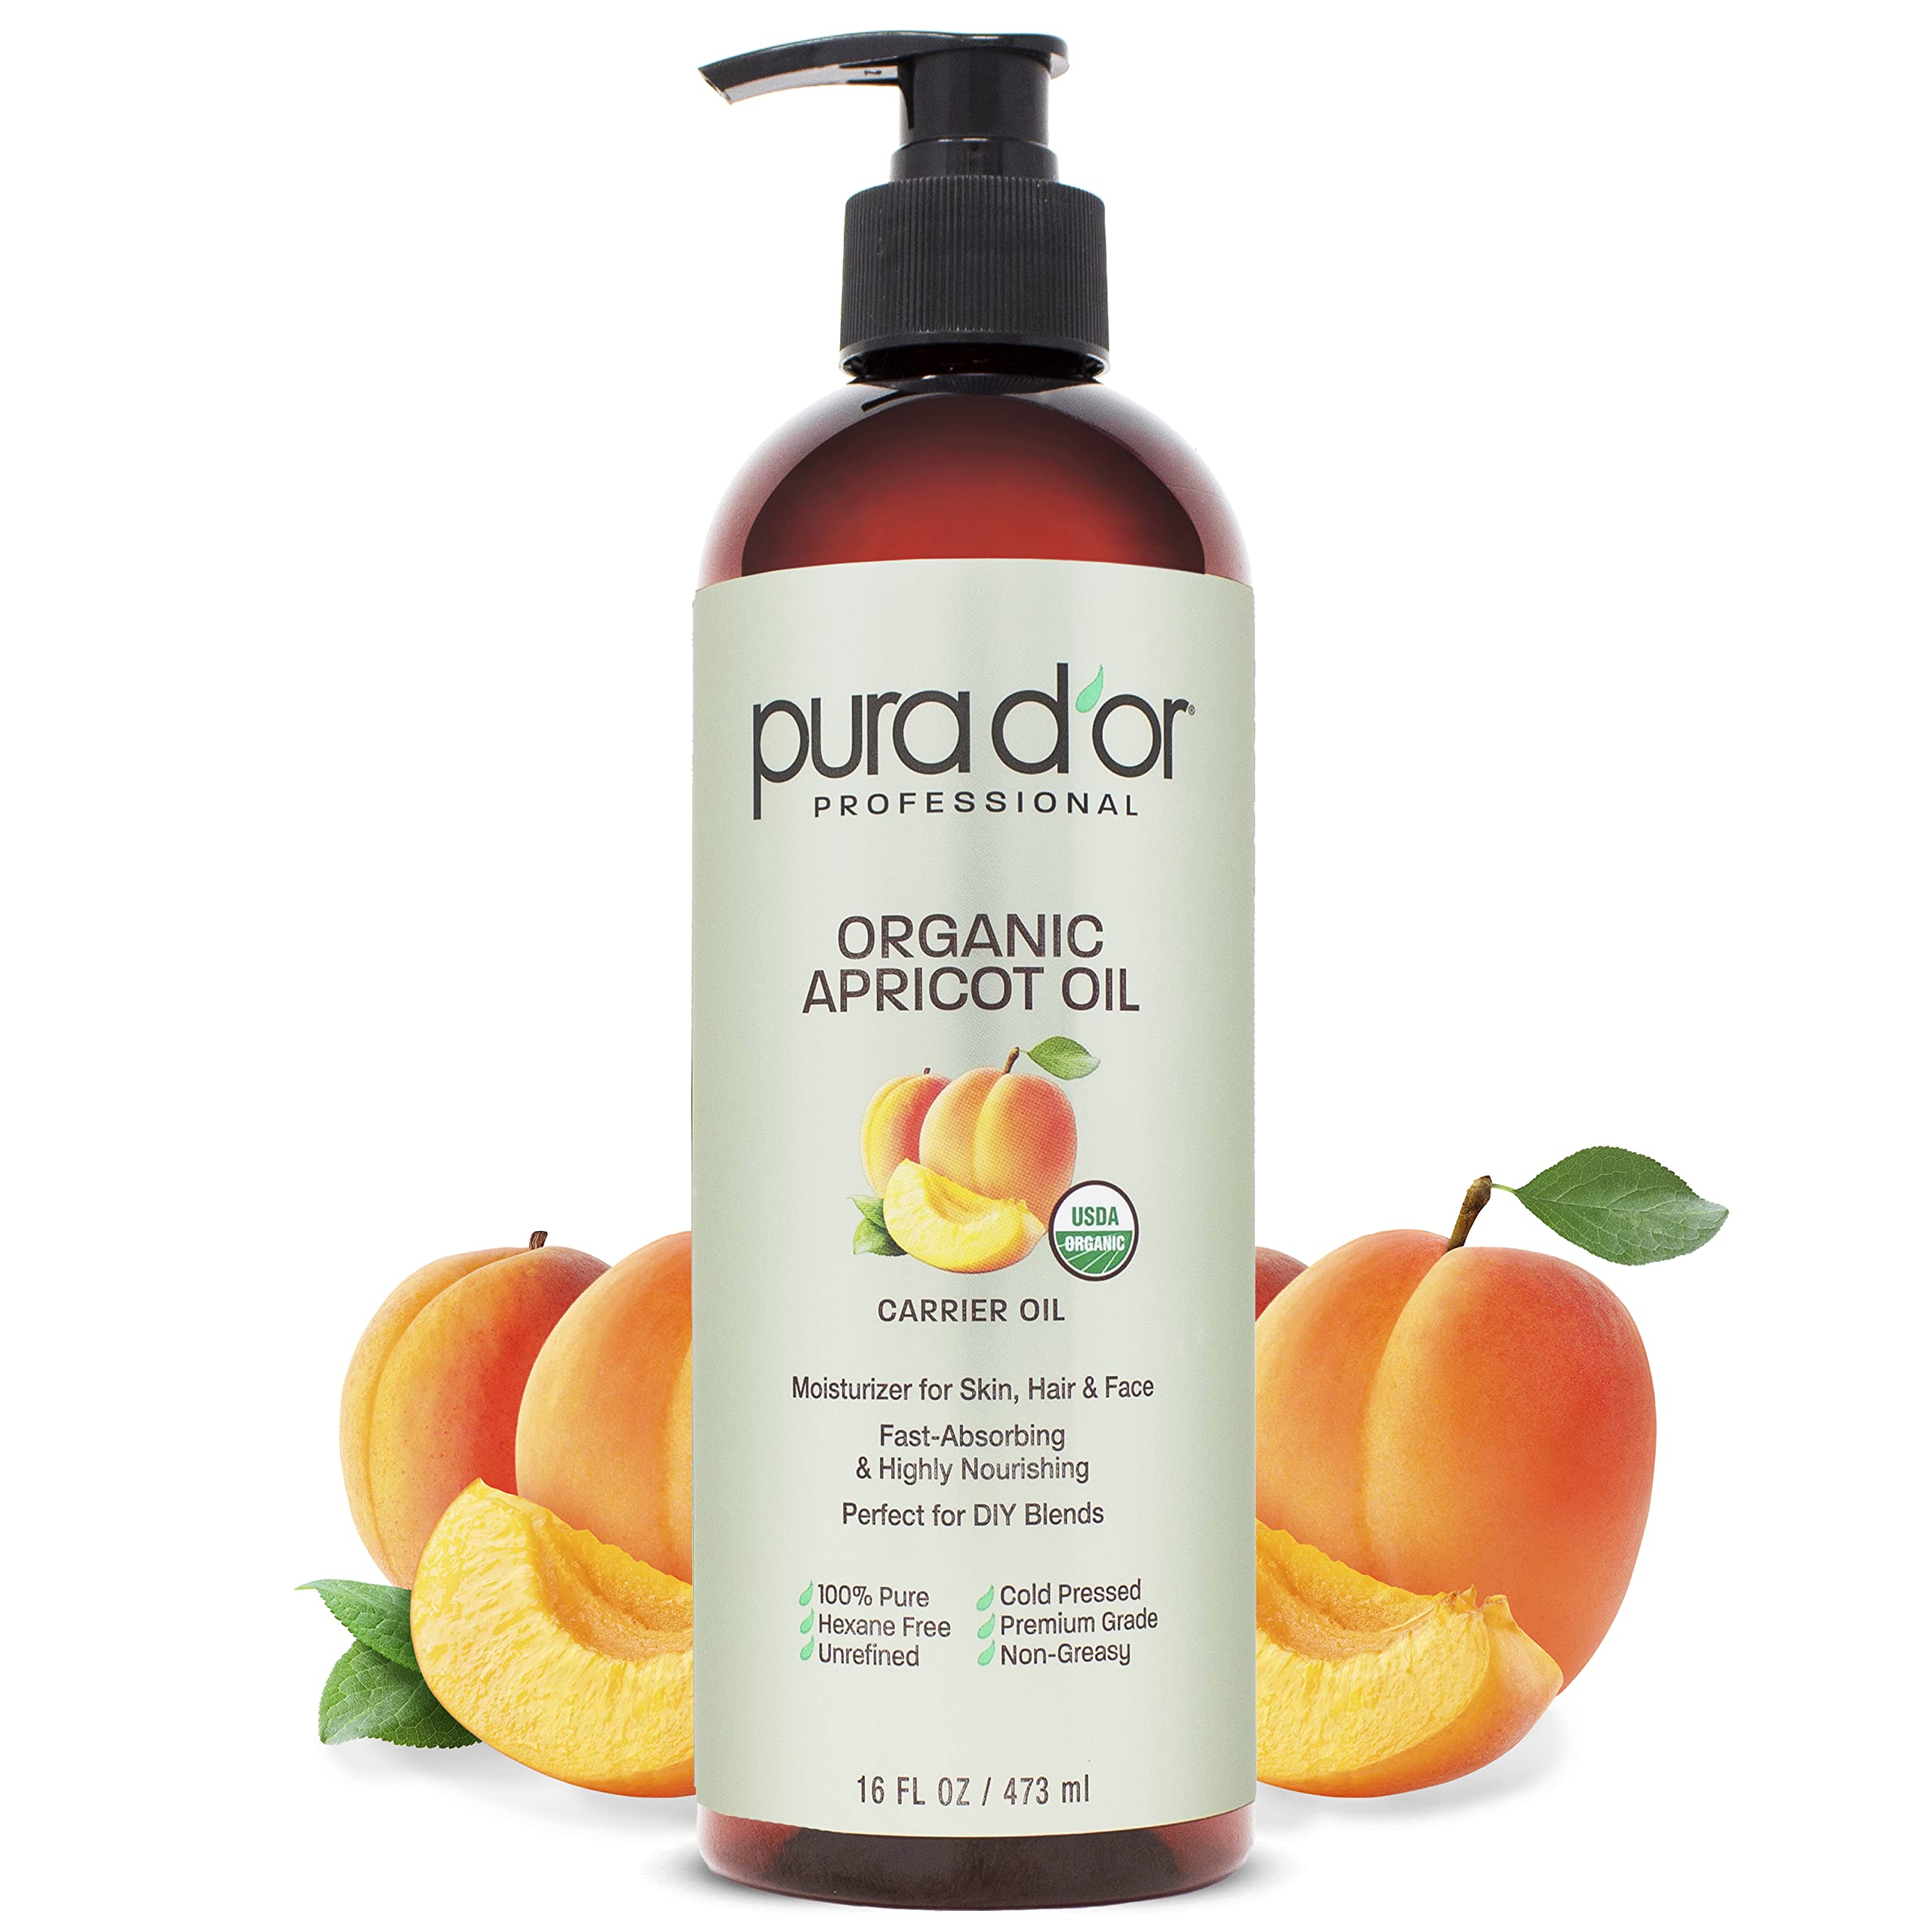 PURA D'OR Organic Apricot Kernel Oil, 100% Pure USDA Certified Natural Unrefined Cold Pressed Carrier Oil, Vitamins & Antioxidants, Nourishing & Moisturizing For Body Massage, Hair, Skin & Nails, 16oz